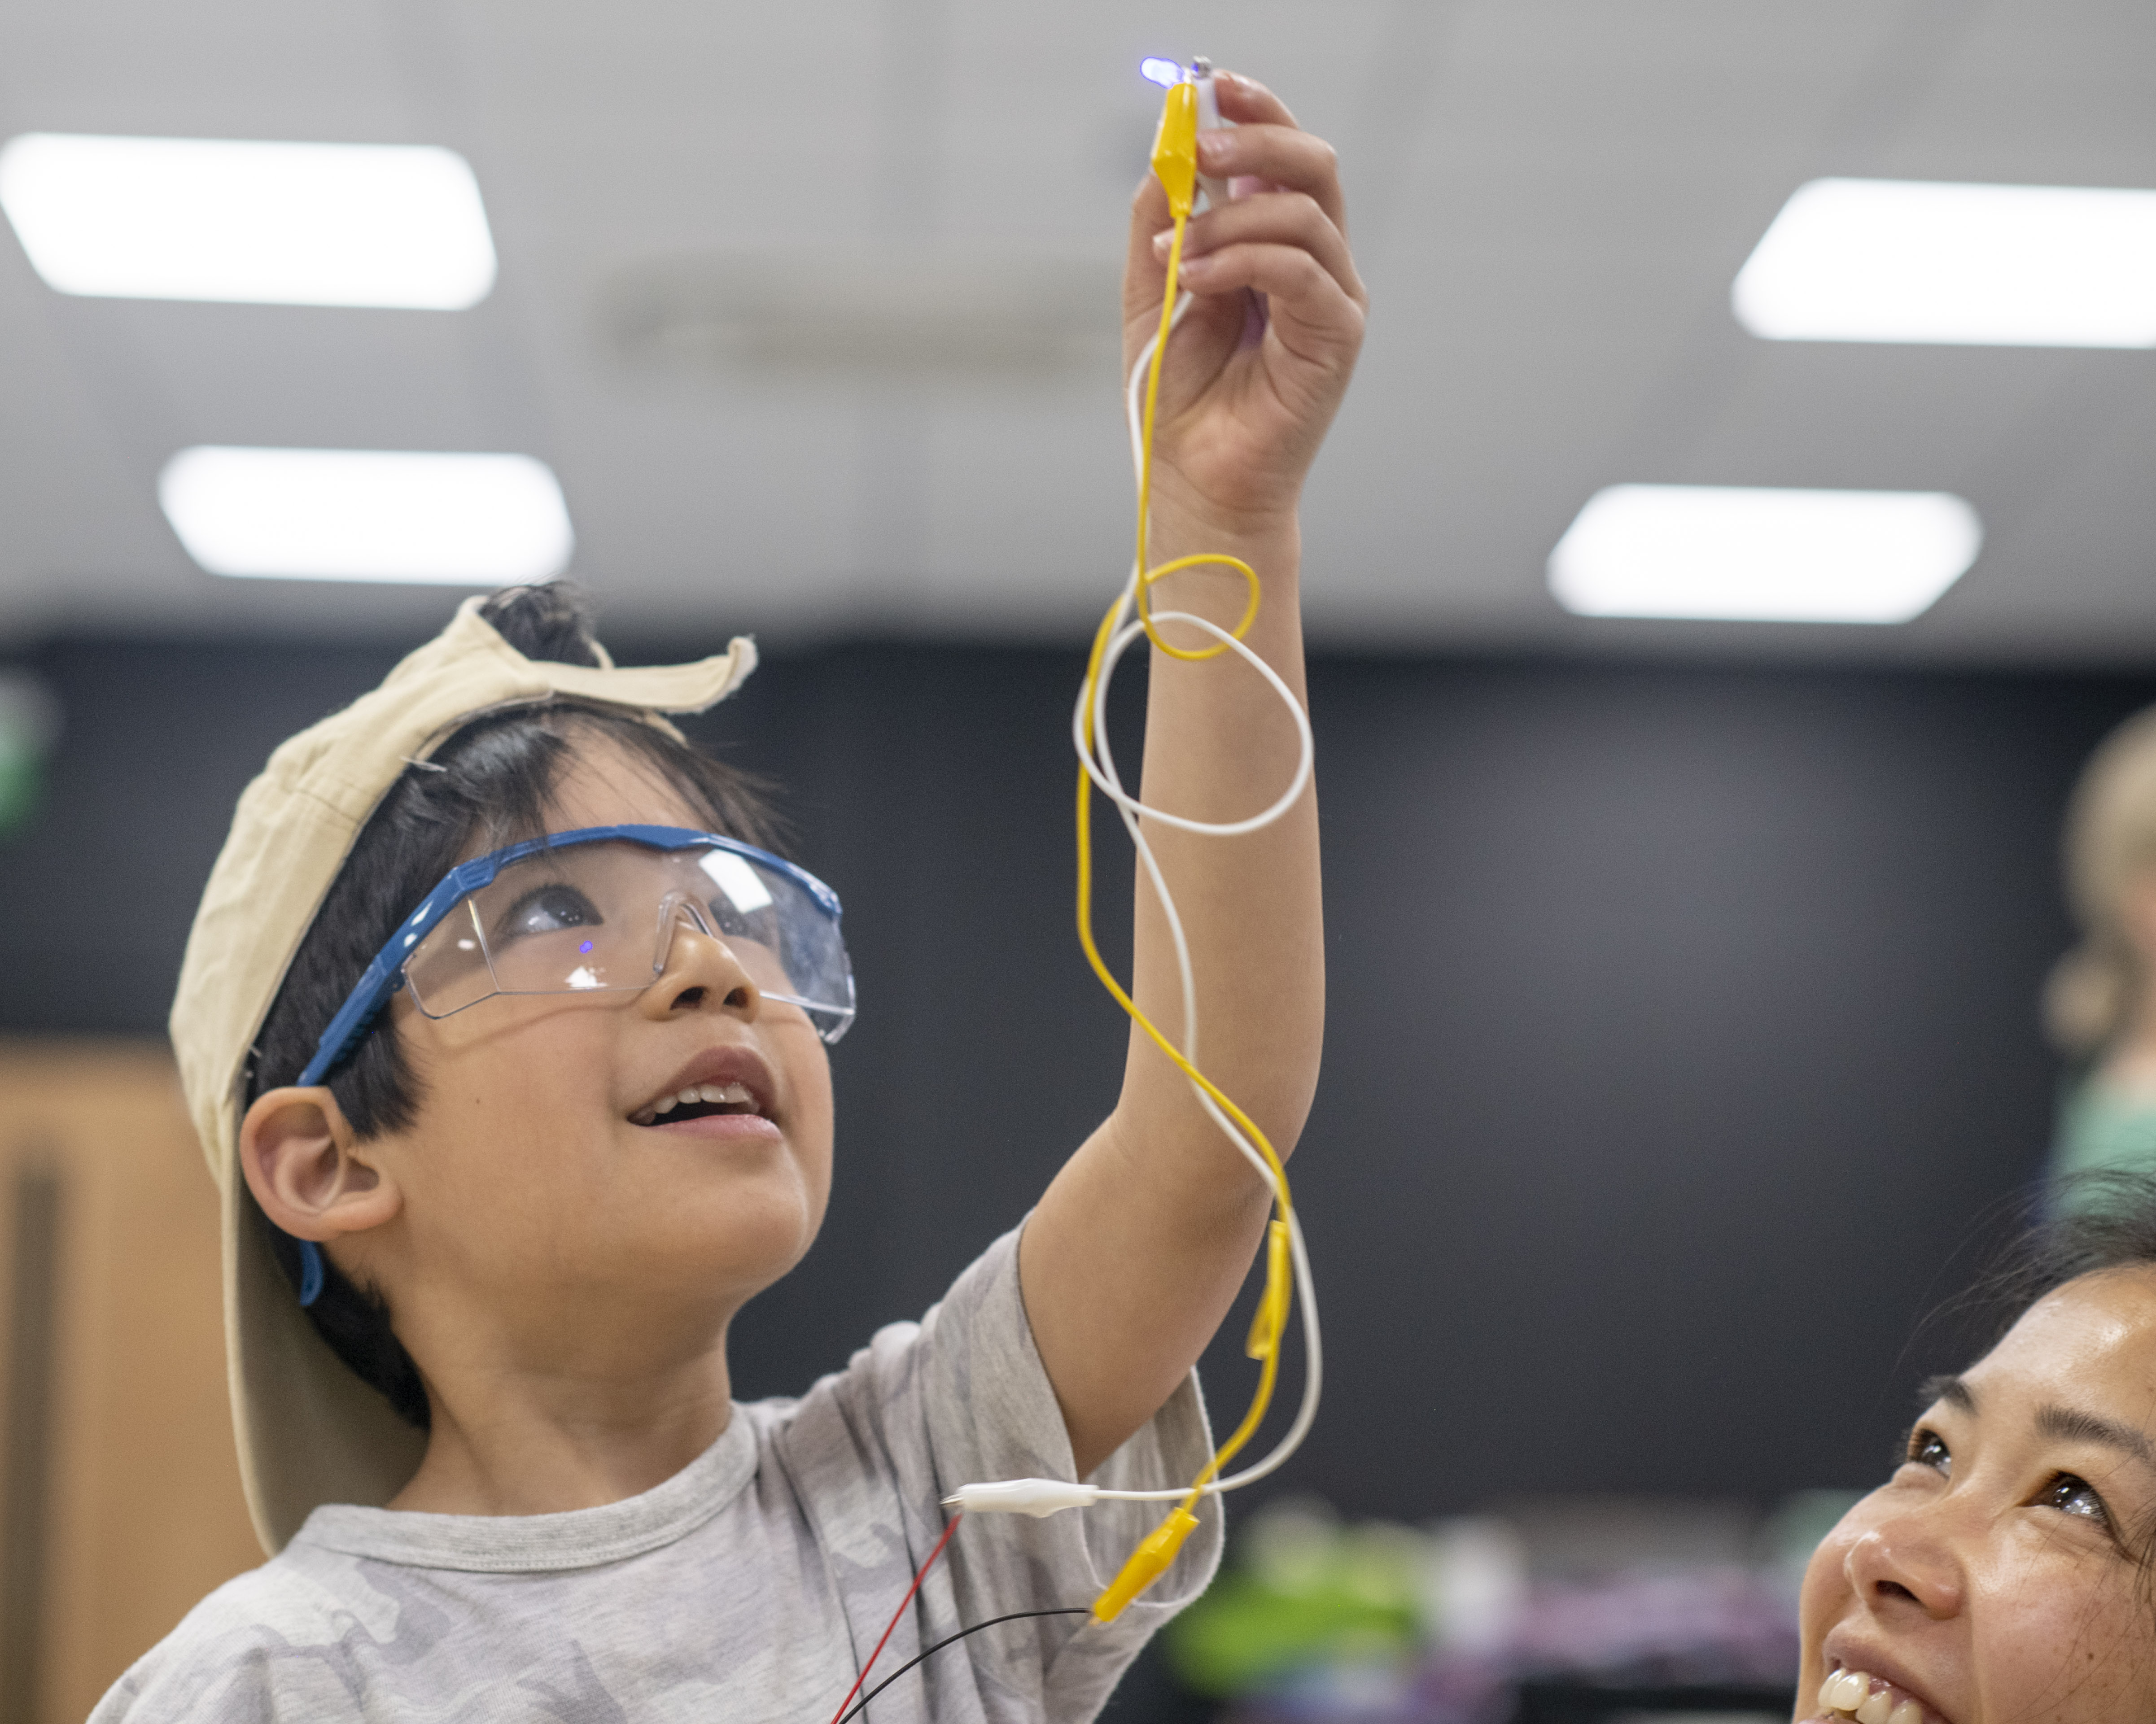 A boy wearing safety goggles and a backwards baseball cap holds up a pair of yellow and white cables with a crocodile clip at the end